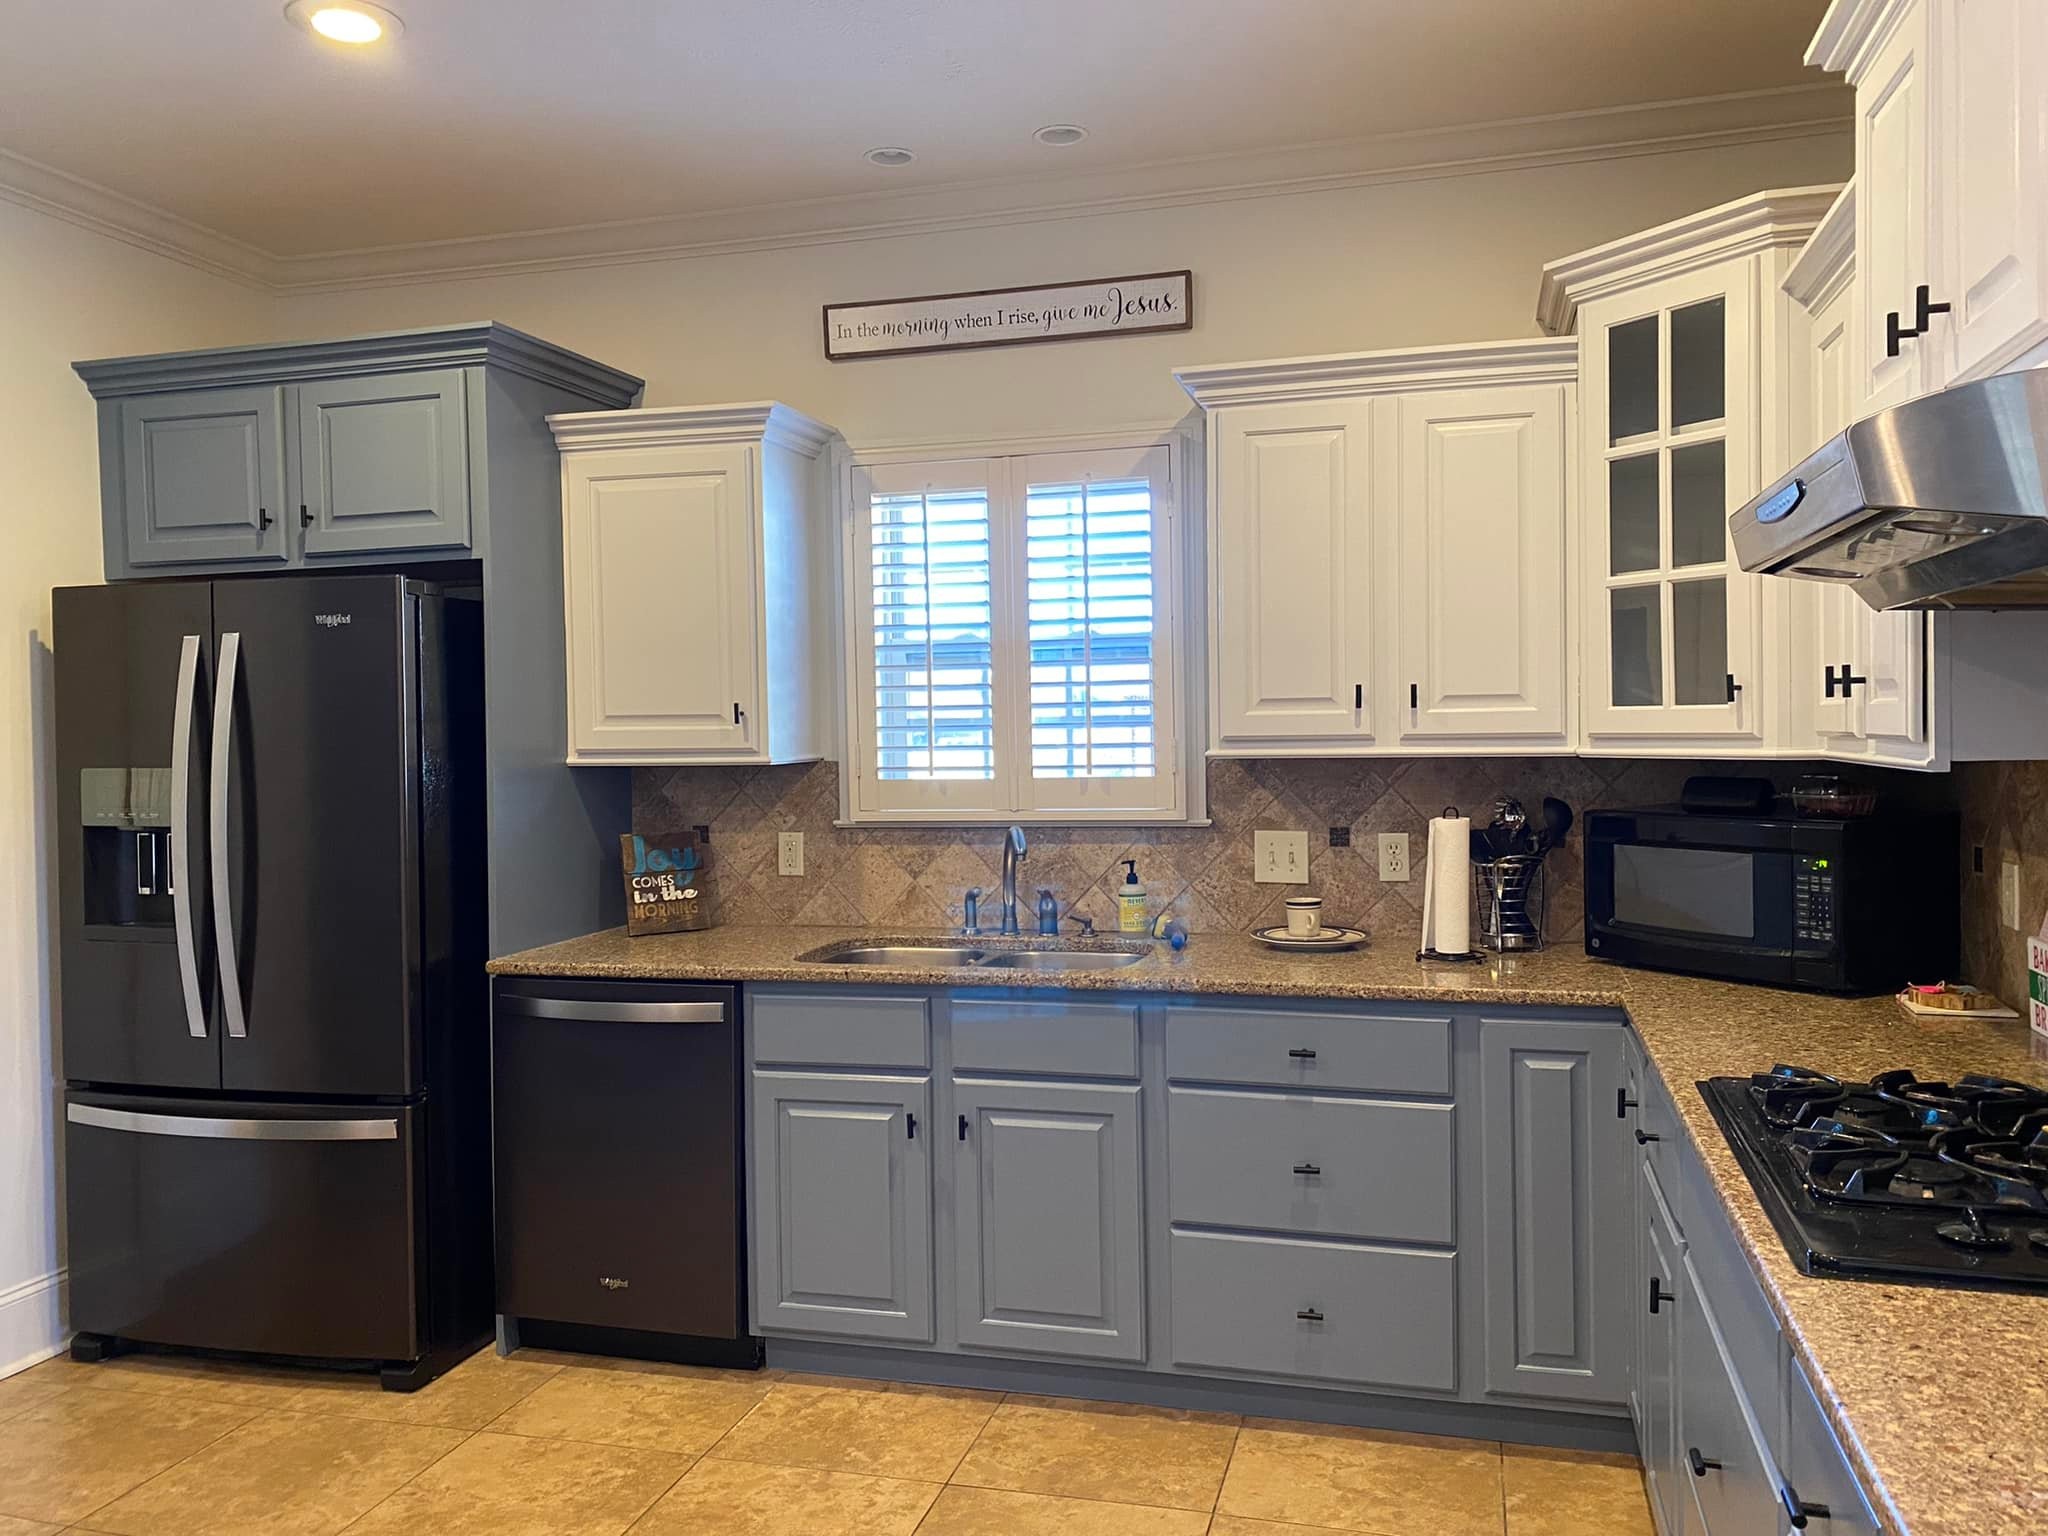 Kitchen and Cabinet Refinishing for Mae Painting in Memphis, Tennessee